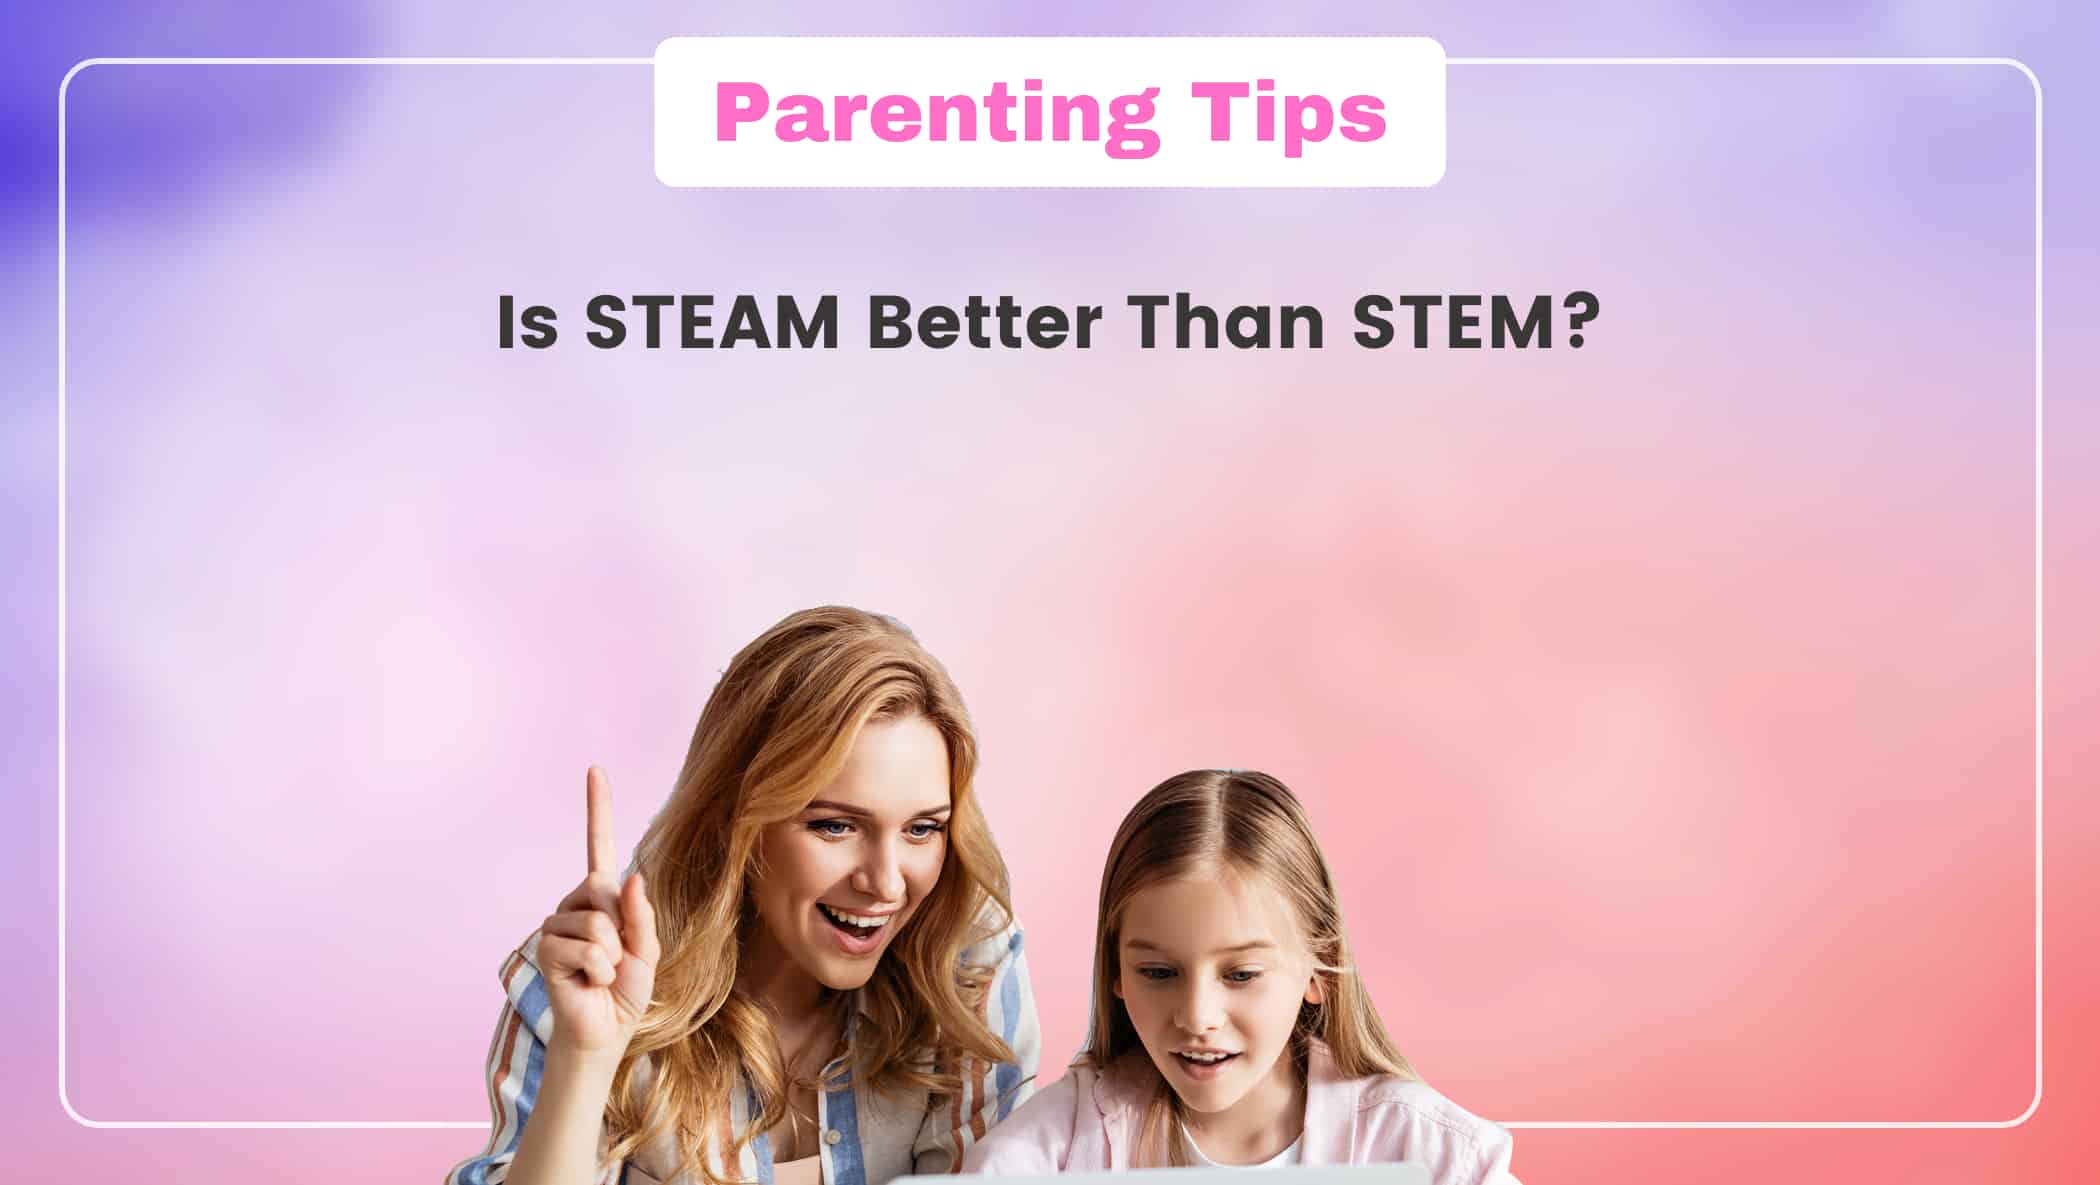 Is STEAM Better Than STEM Image